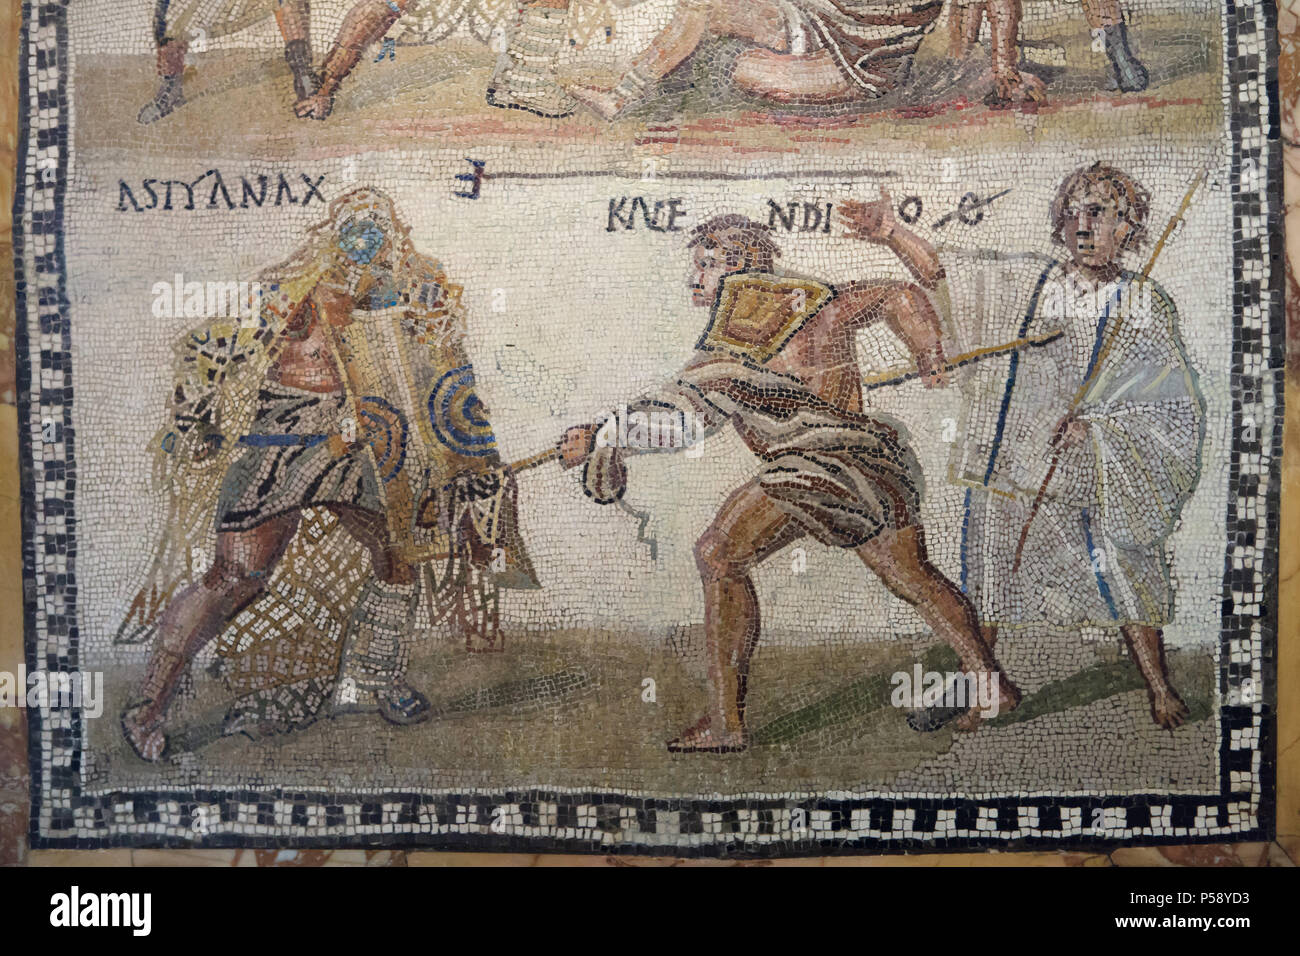 Gladiator fight depicted in the Roman mosaic from the 3rd century AD on display in the National Archaeological Museum (Museo Arqueológico Nacional) in Madrid, Spain. The secutor (Roman armed gladiator) fighting versus the retiarius (Roman net fighter). According to the Latin inscription, the secutor Astyanax and the retiarius Kalendio are engaged in mortal combat. The lanista (gladiator trainer) cheers them on. The outcome is confirmed by the inscriptions: the word VICIT appears beside Astyanax, and beside Kalendio's name is an O with a line through it, an abbreviation for Obiit or Death. Stock Photo